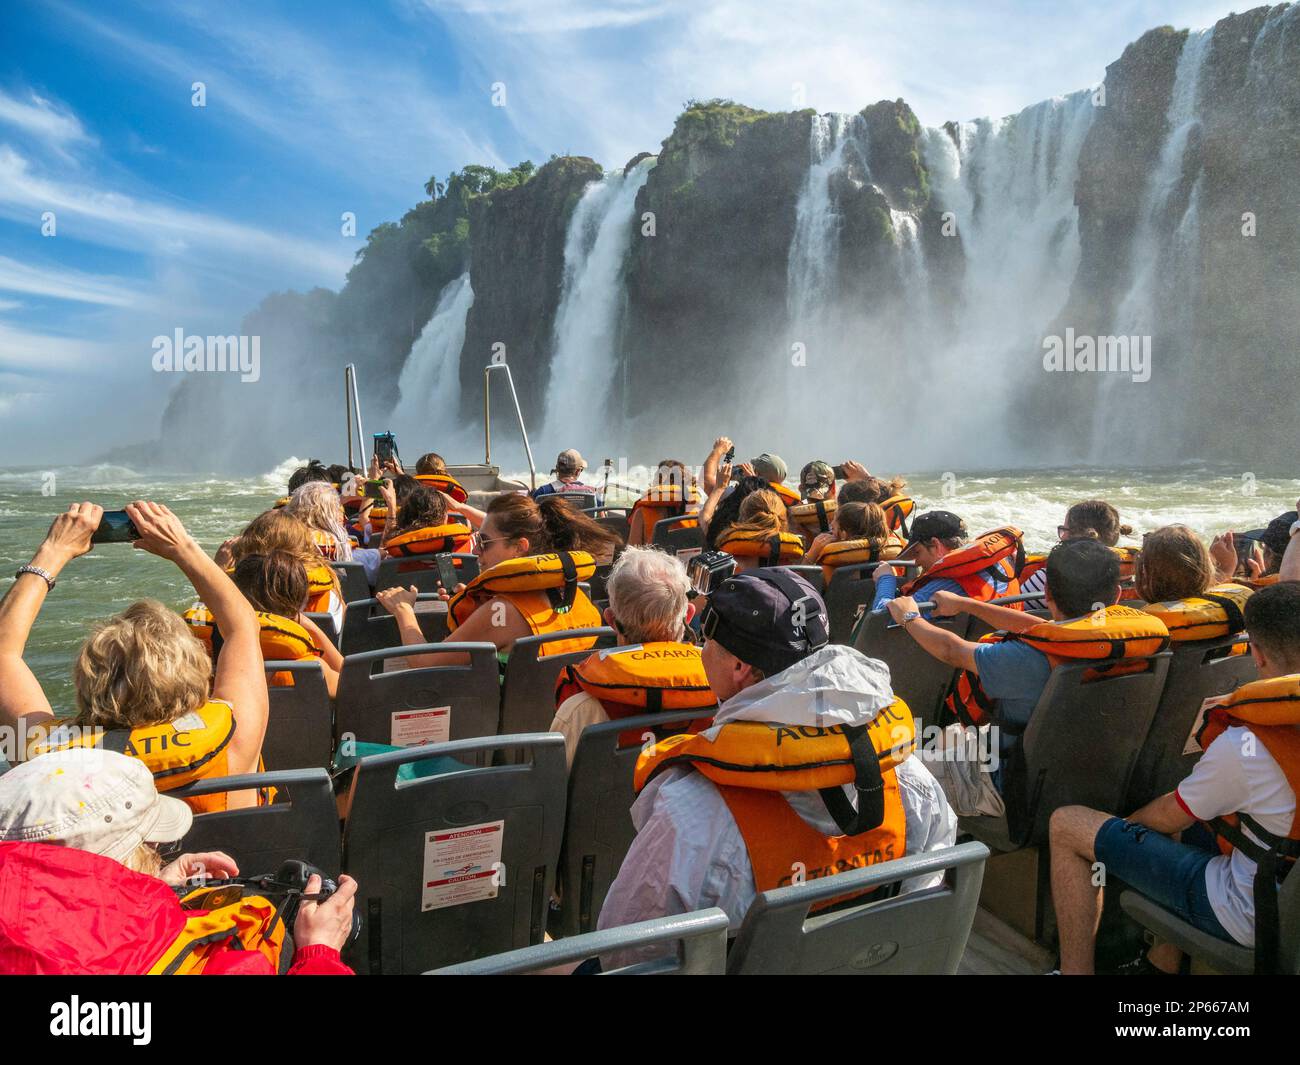 A view of the boat ride from the lower circuit at Iguazu Falls, UNESCO World Heritage Site, Misiones Province, Argentina, South America Stock Photo